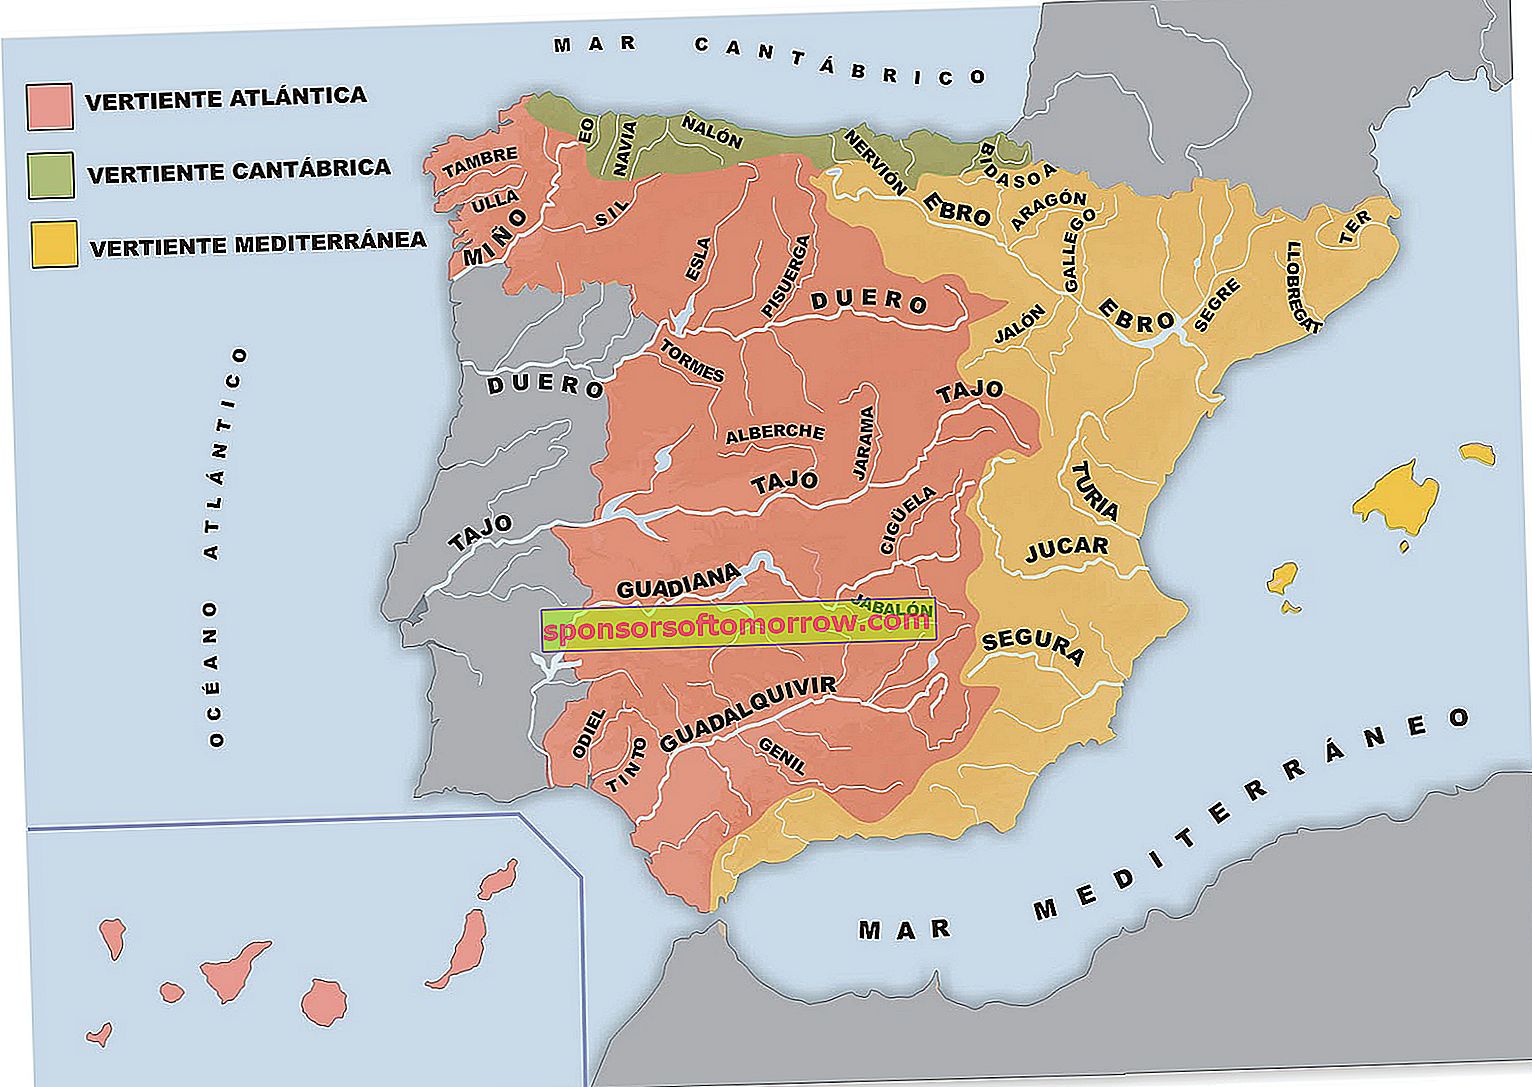 More than 100 images and maps of rivers in Spain